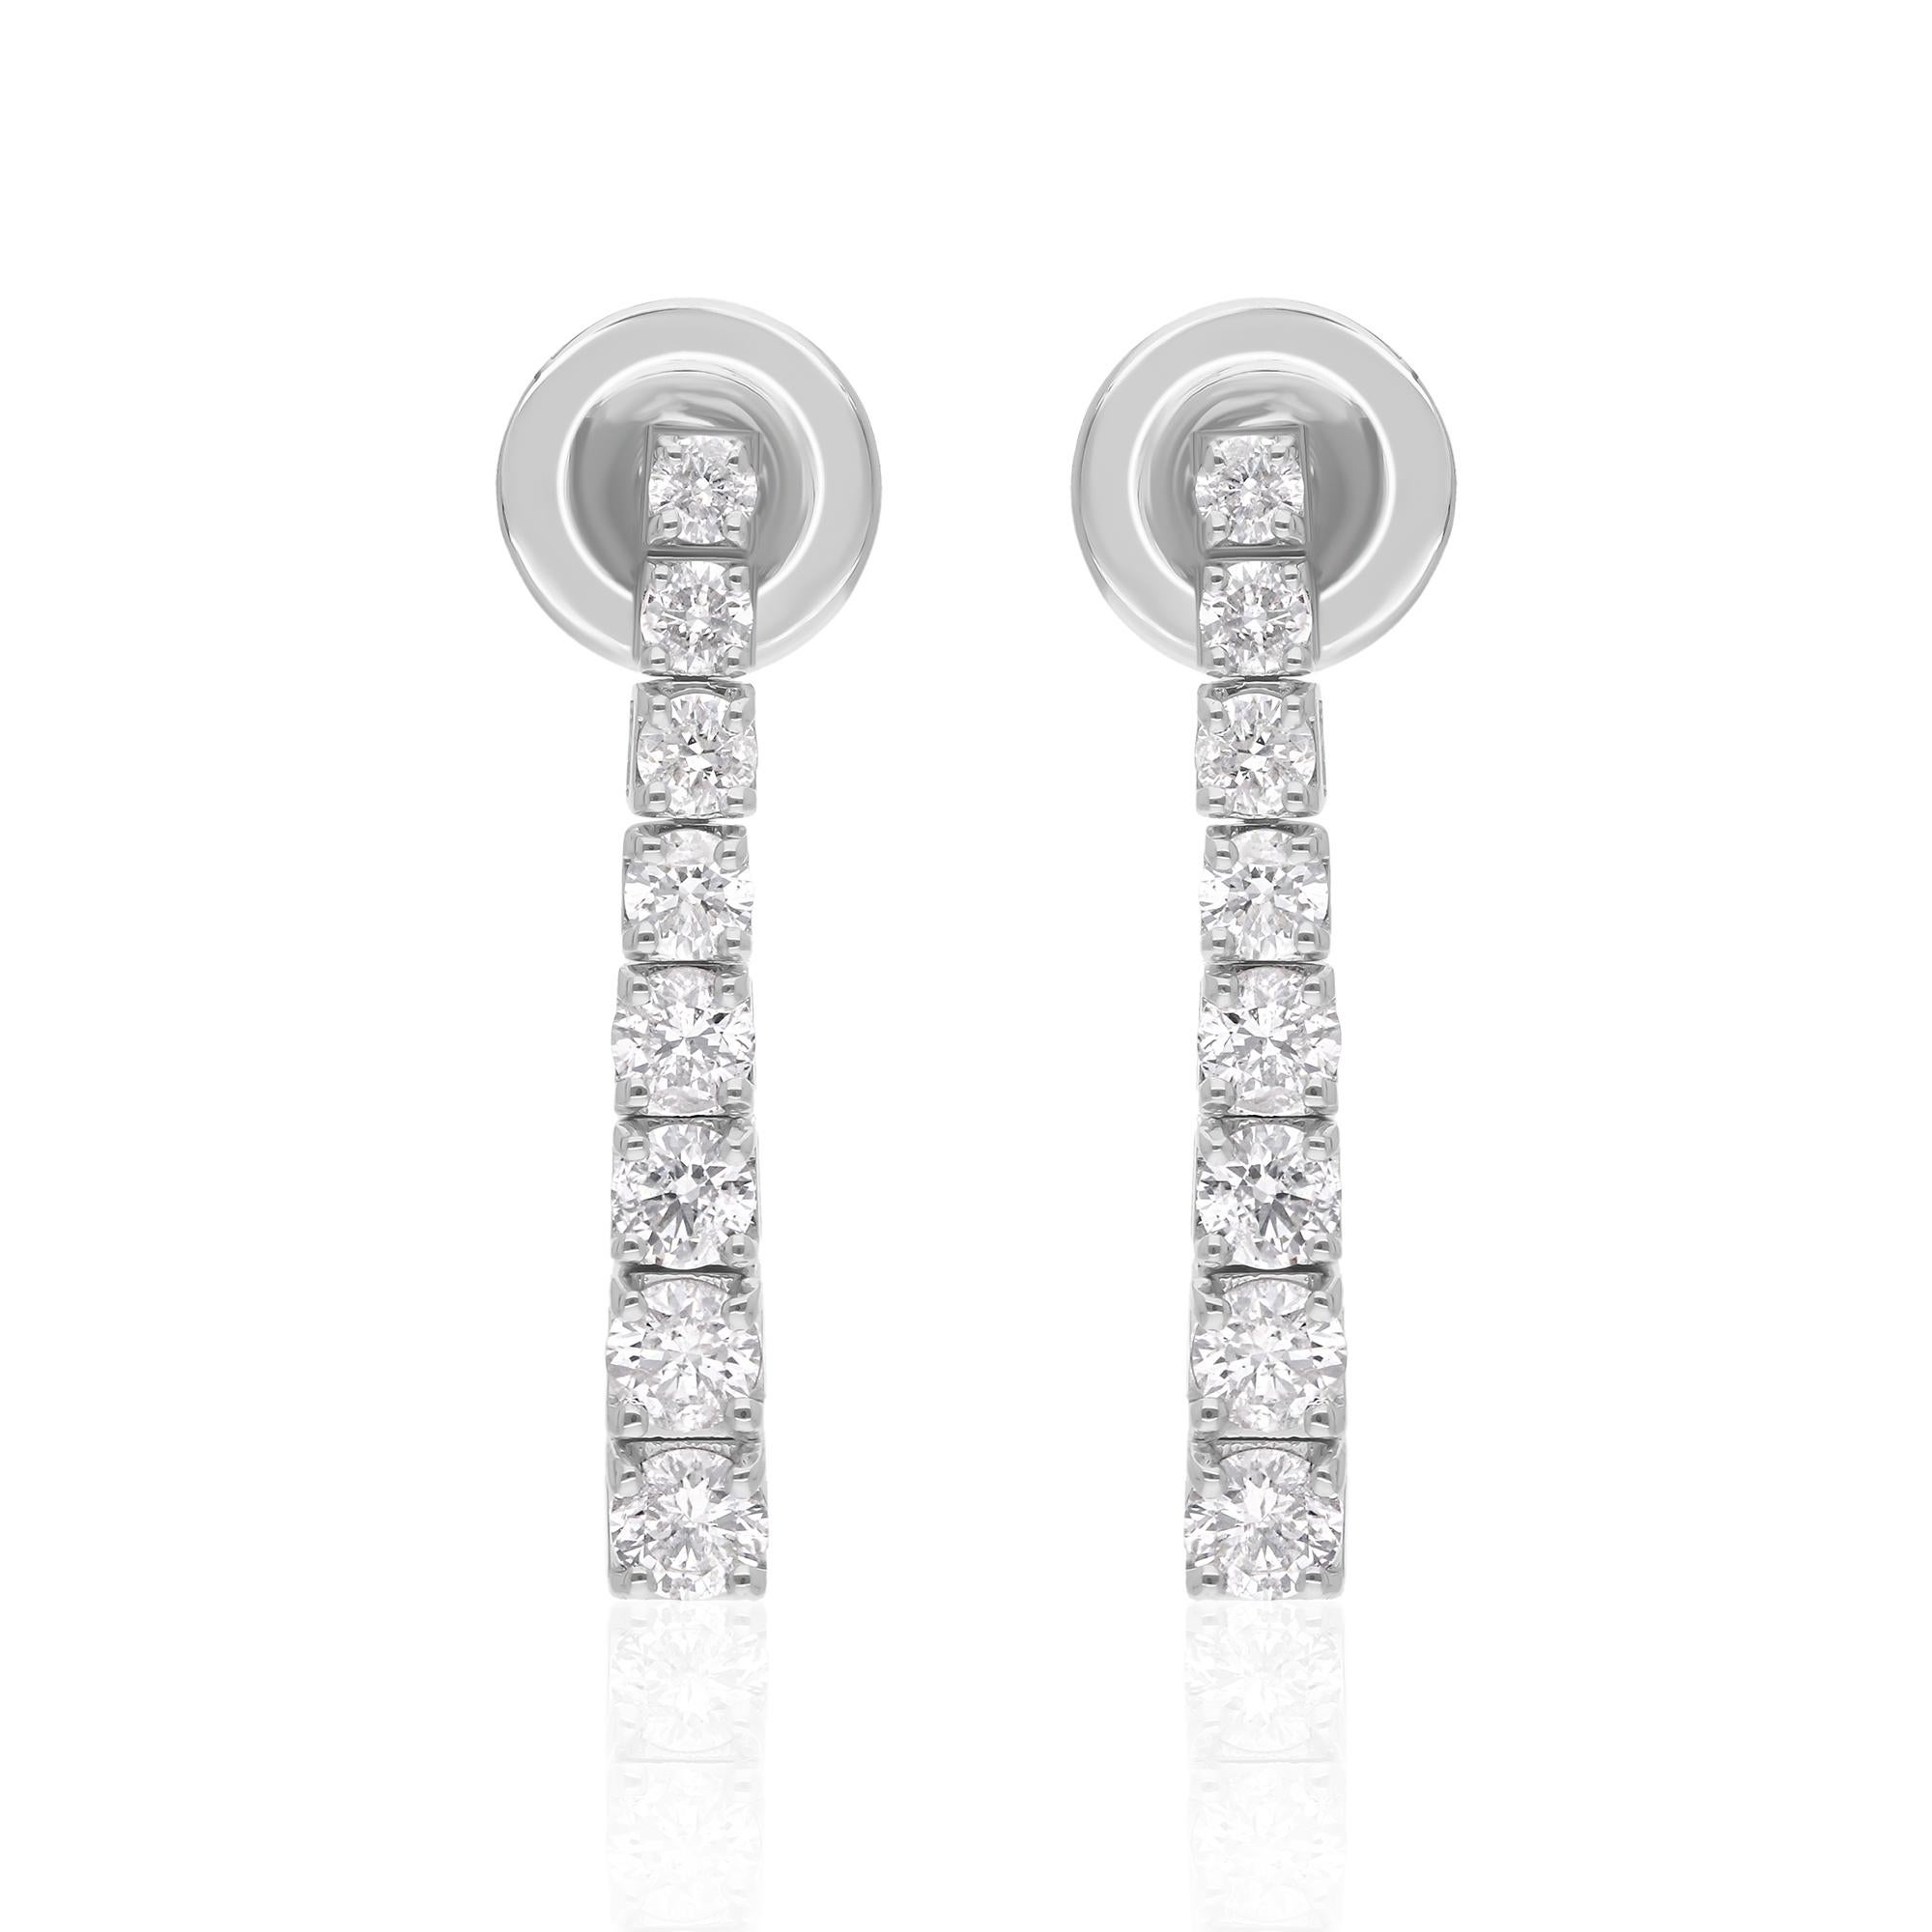 Each earring features a stunning arrangement of graduated diamonds, carefully selected and set to create a captivating visual effect. The diamonds, ranging in size from small to large, are expertly arranged to enhance their brilliance and sparkle